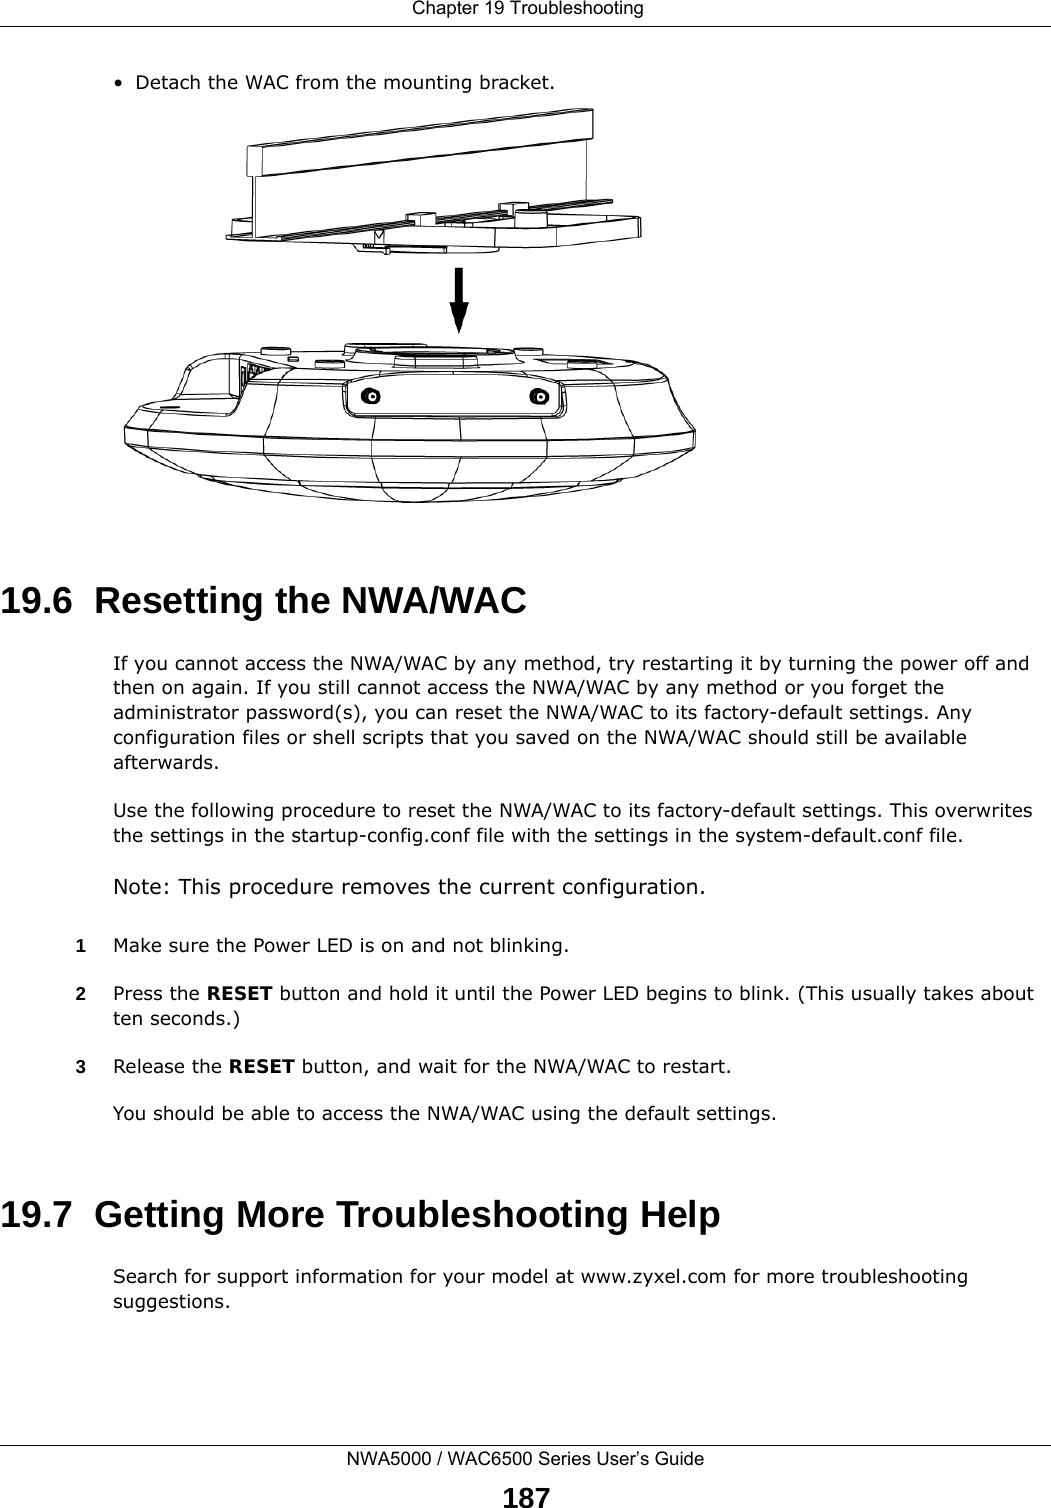  Chapter 19 TroubleshootingNWA5000 / WAC6500 Series User’s Guide187• Detach the WAC from the mounting bracket.19.6  Resetting the NWA/WACIf you cannot access the NWA/WAC by any method, try restarting it by turning the power off and then on again. If you still cannot access the NWA/WAC by any method or you forget the administrator password(s), you can reset the NWA/WAC to its factory-default settings. Any configuration files or shell scripts that you saved on the NWA/WAC should still be available afterwards.Use the following procedure to reset the NWA/WAC to its factory-default settings. This overwrites the settings in the startup-config.conf file with the settings in the system-default.conf file. Note: This procedure removes the current configuration. 1Make sure the Power LED is on and not blinking.2Press the RESET button and hold it until the Power LED begins to blink. (This usually takes about ten seconds.)3Release the RESET button, and wait for the NWA/WAC to restart.You should be able to access the NWA/WAC using the default settings.19.7  Getting More Troubleshooting HelpSearch for support information for your model at www.zyxel.com for more troubleshooting suggestions.